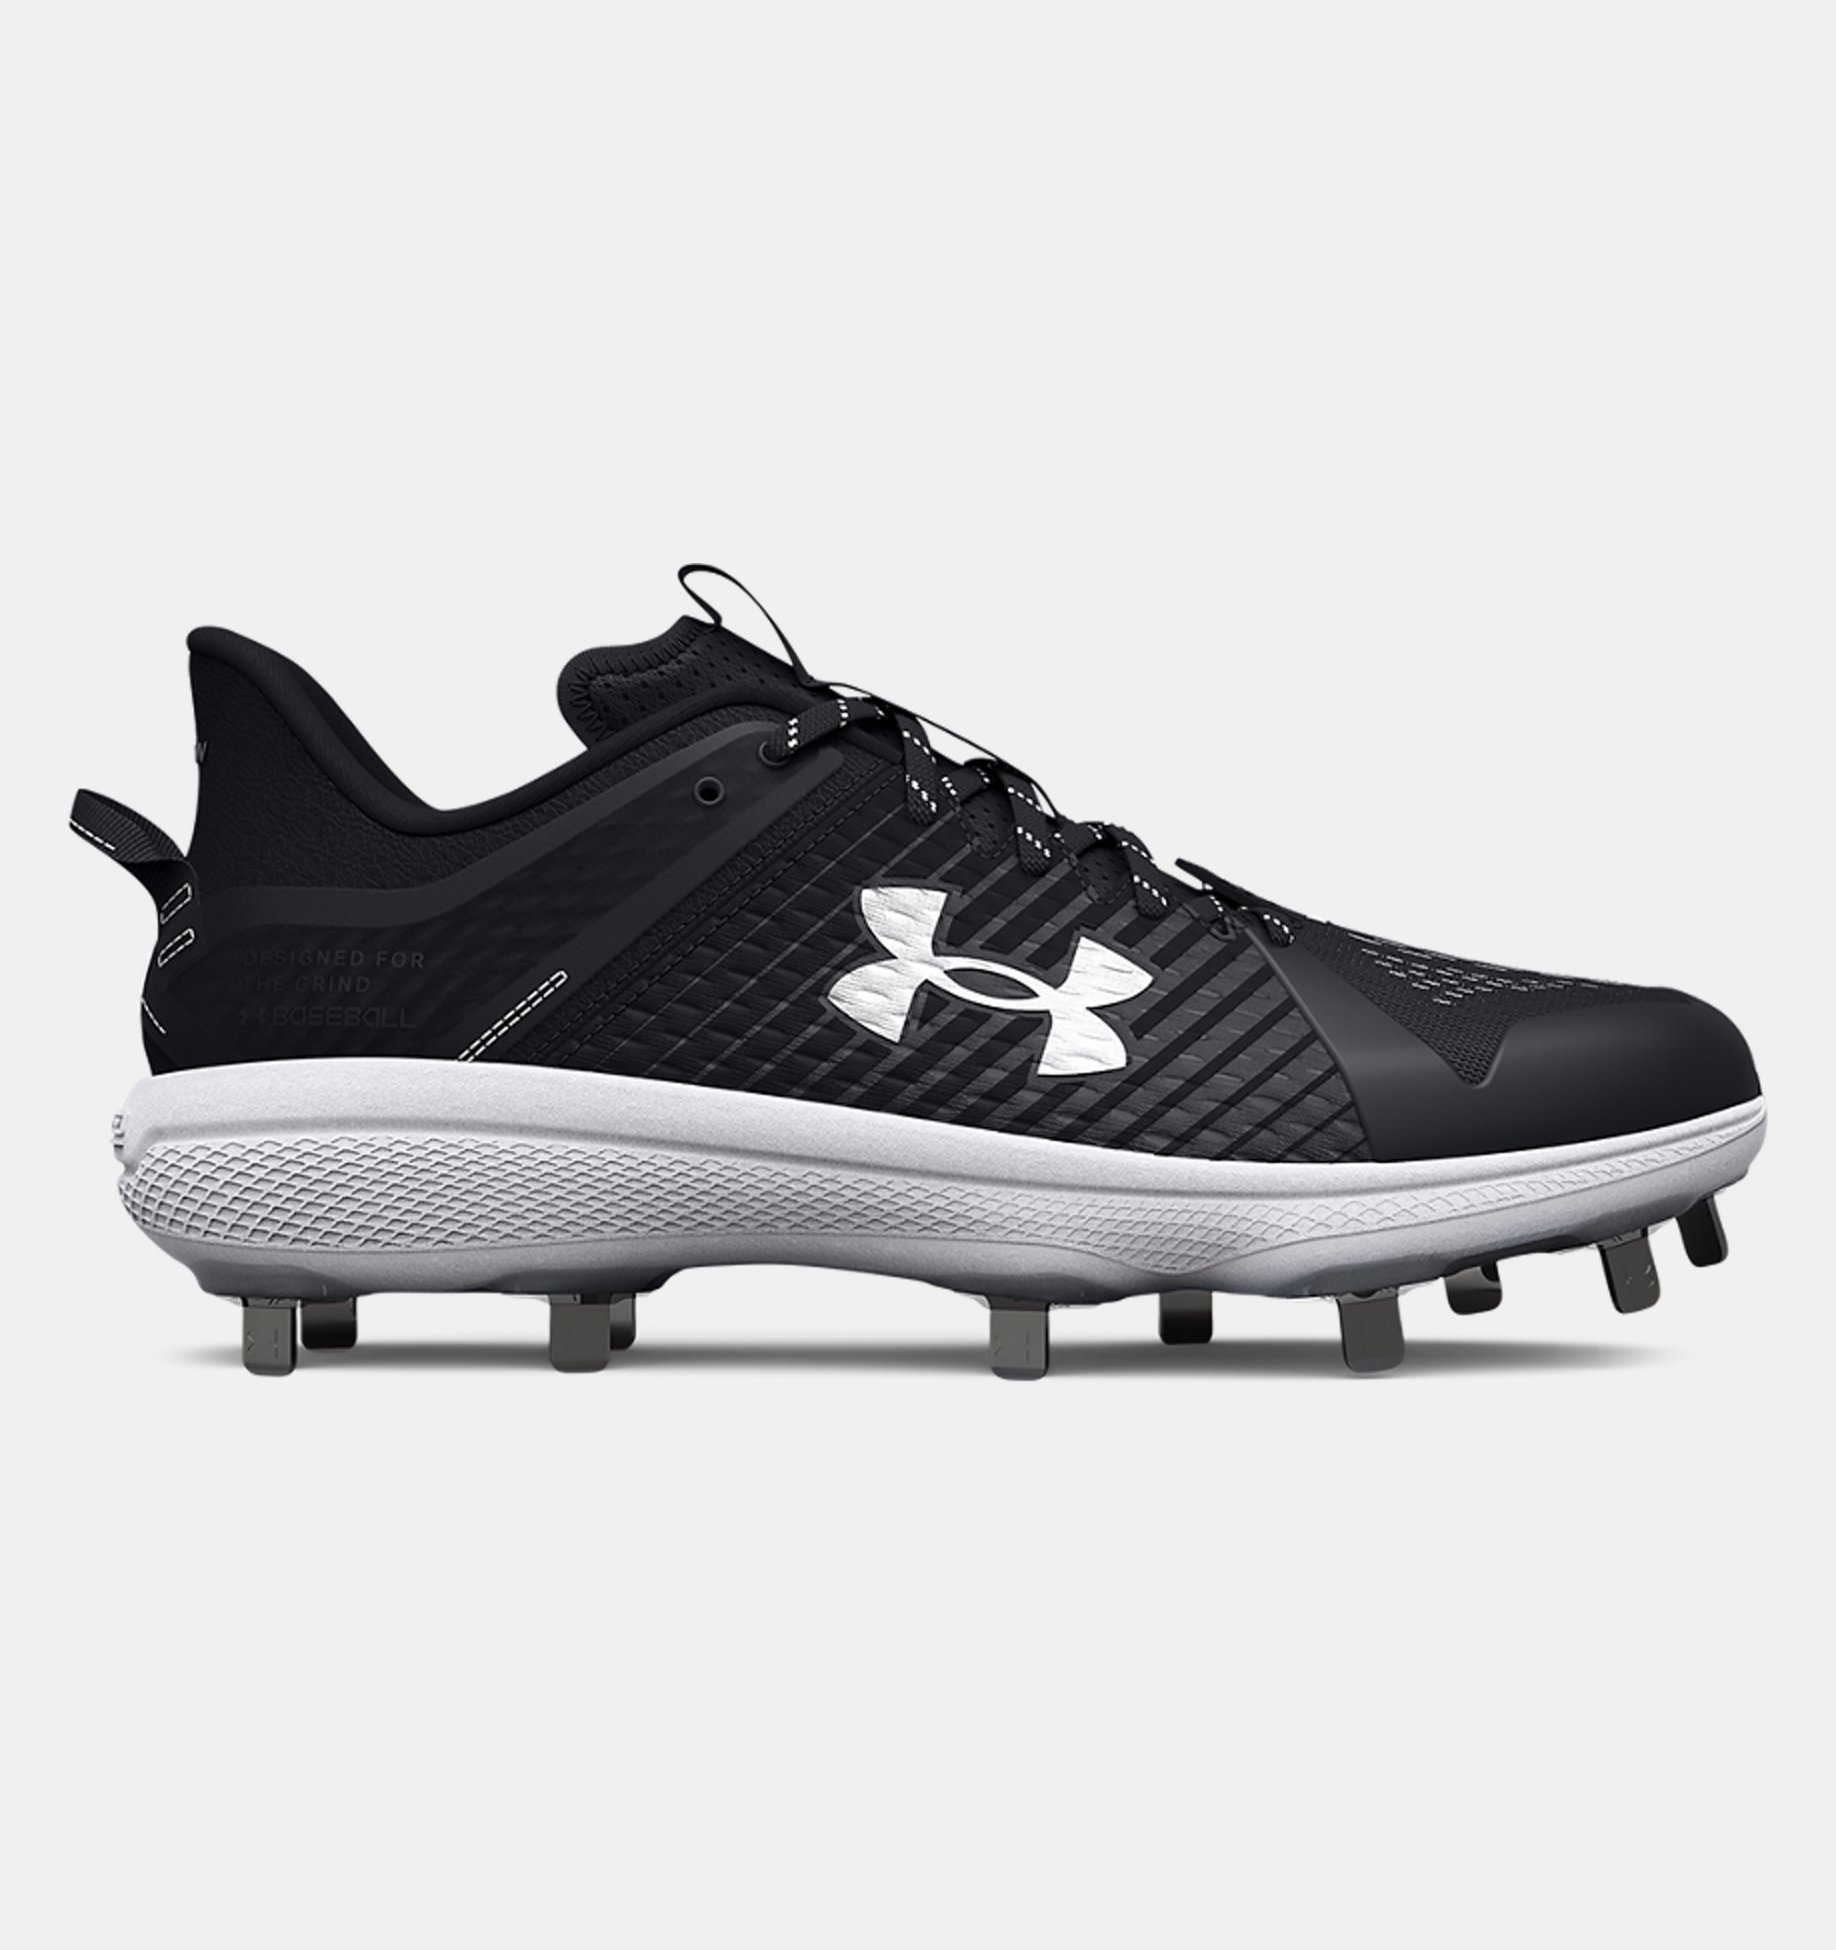 Under Armour Mens Yard Low St Baseball Shoe 